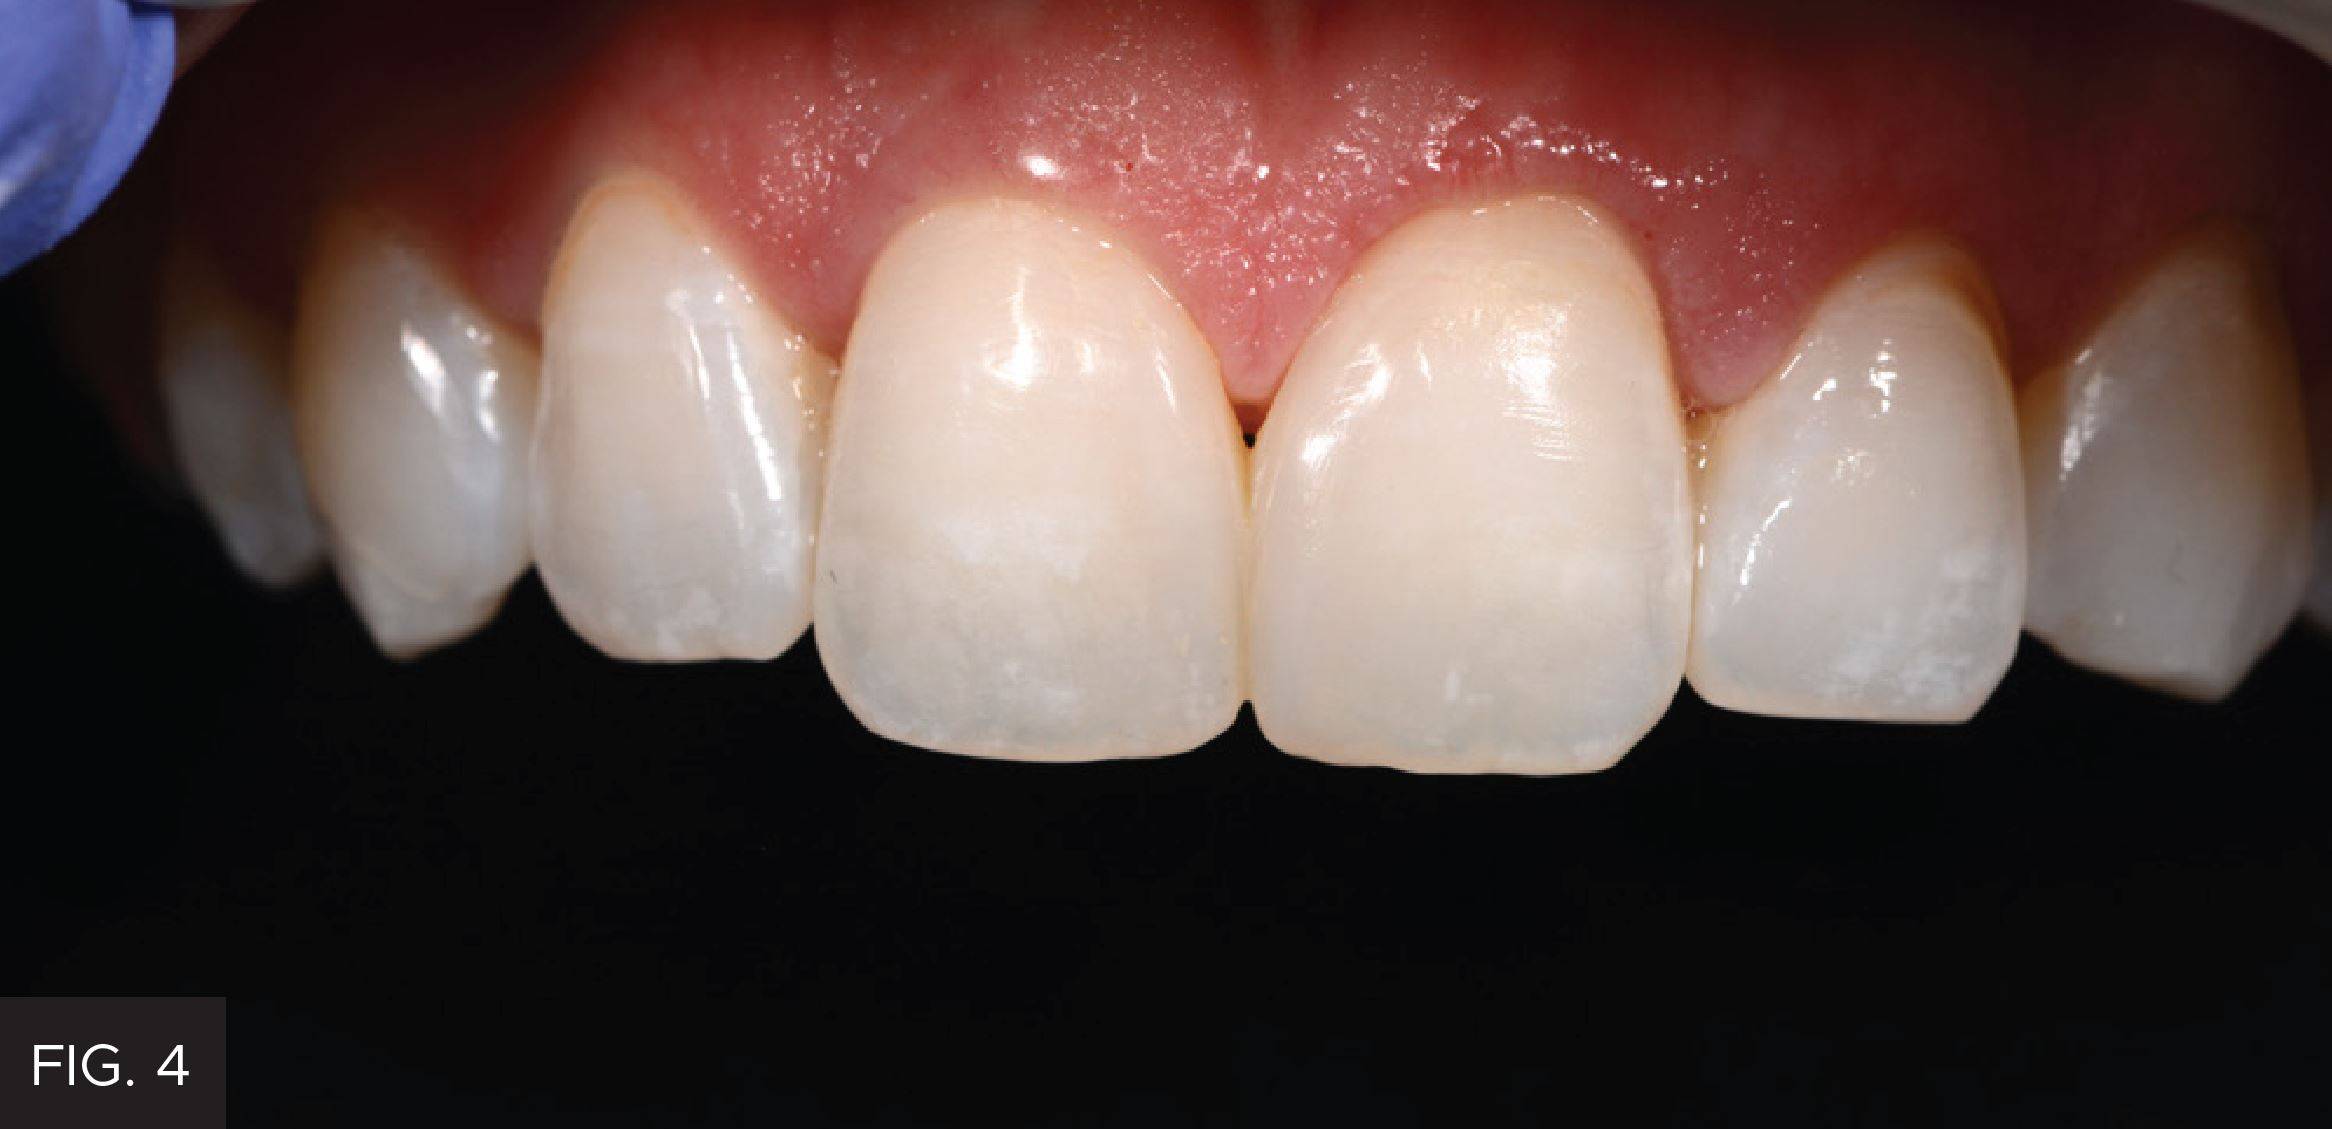 Gingival Sculpting With a Soft Tissue Diode Laser: Figure 4